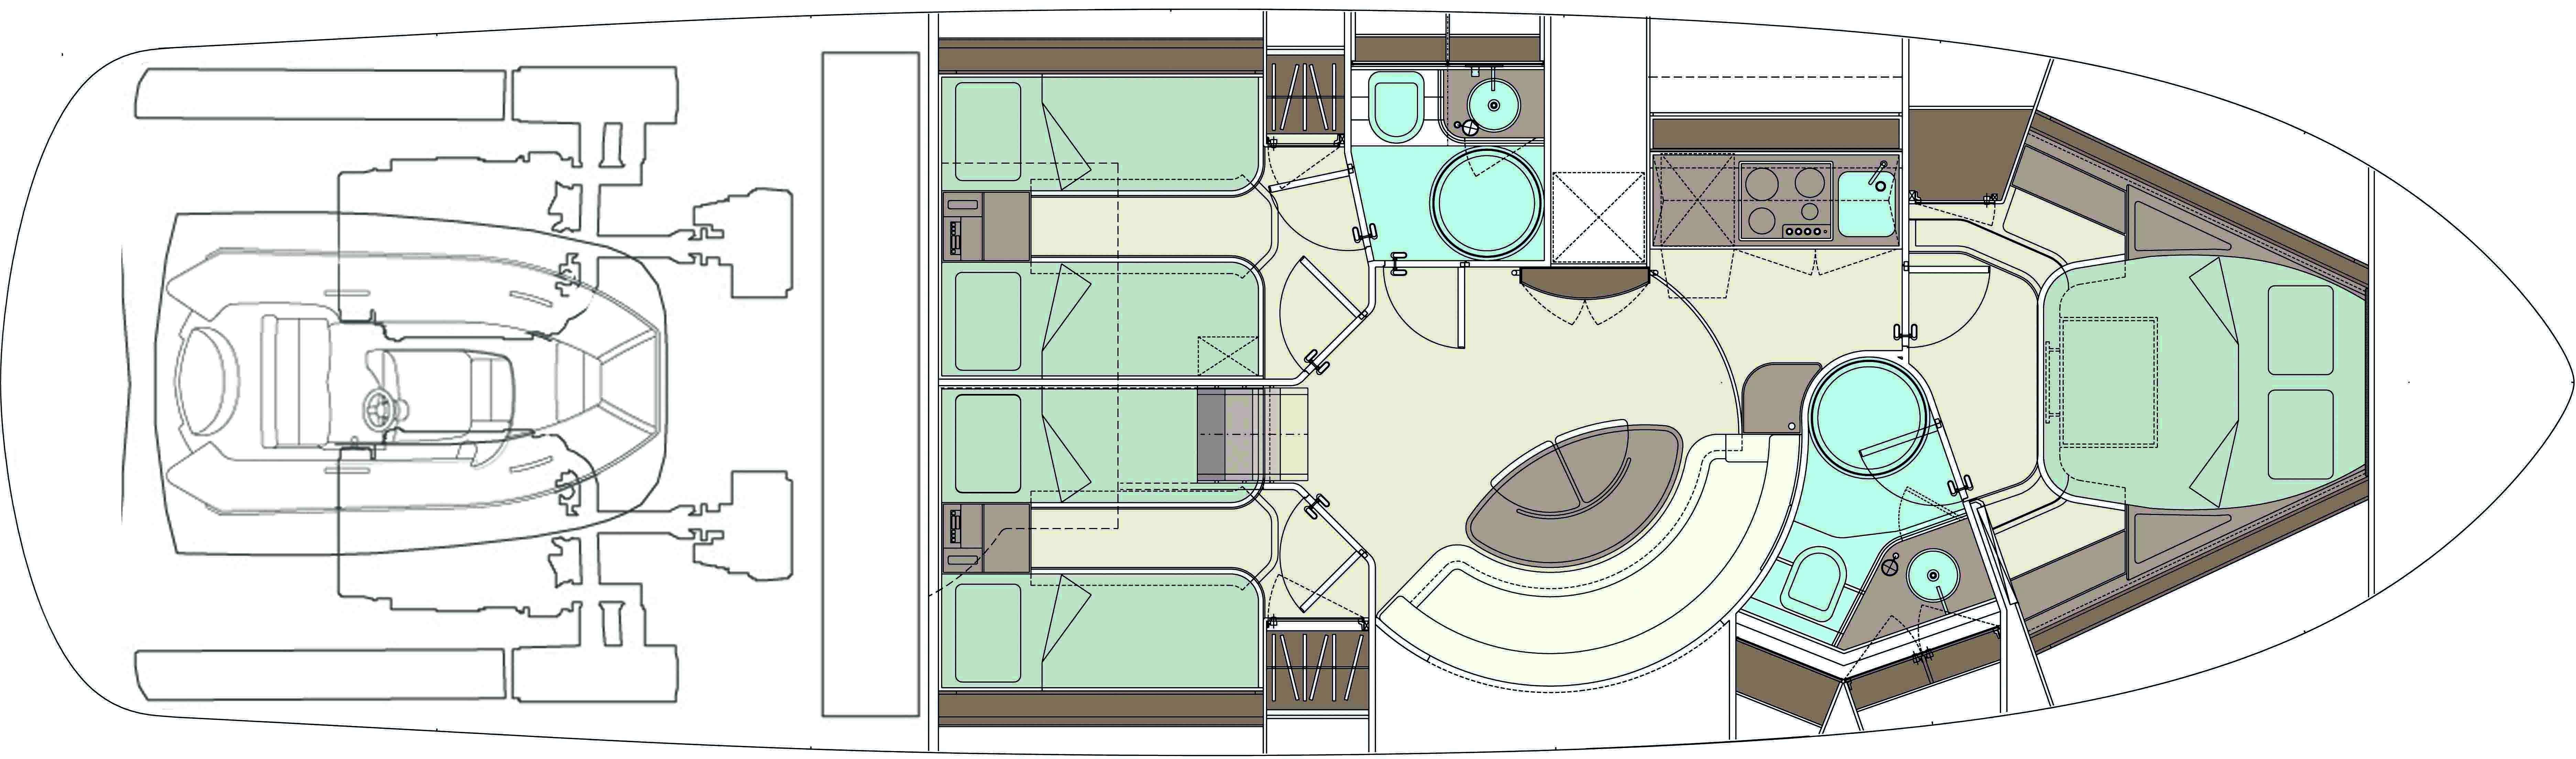 Manufacturer Provided Image: Riva Rivale Lower Deck Layout Plan